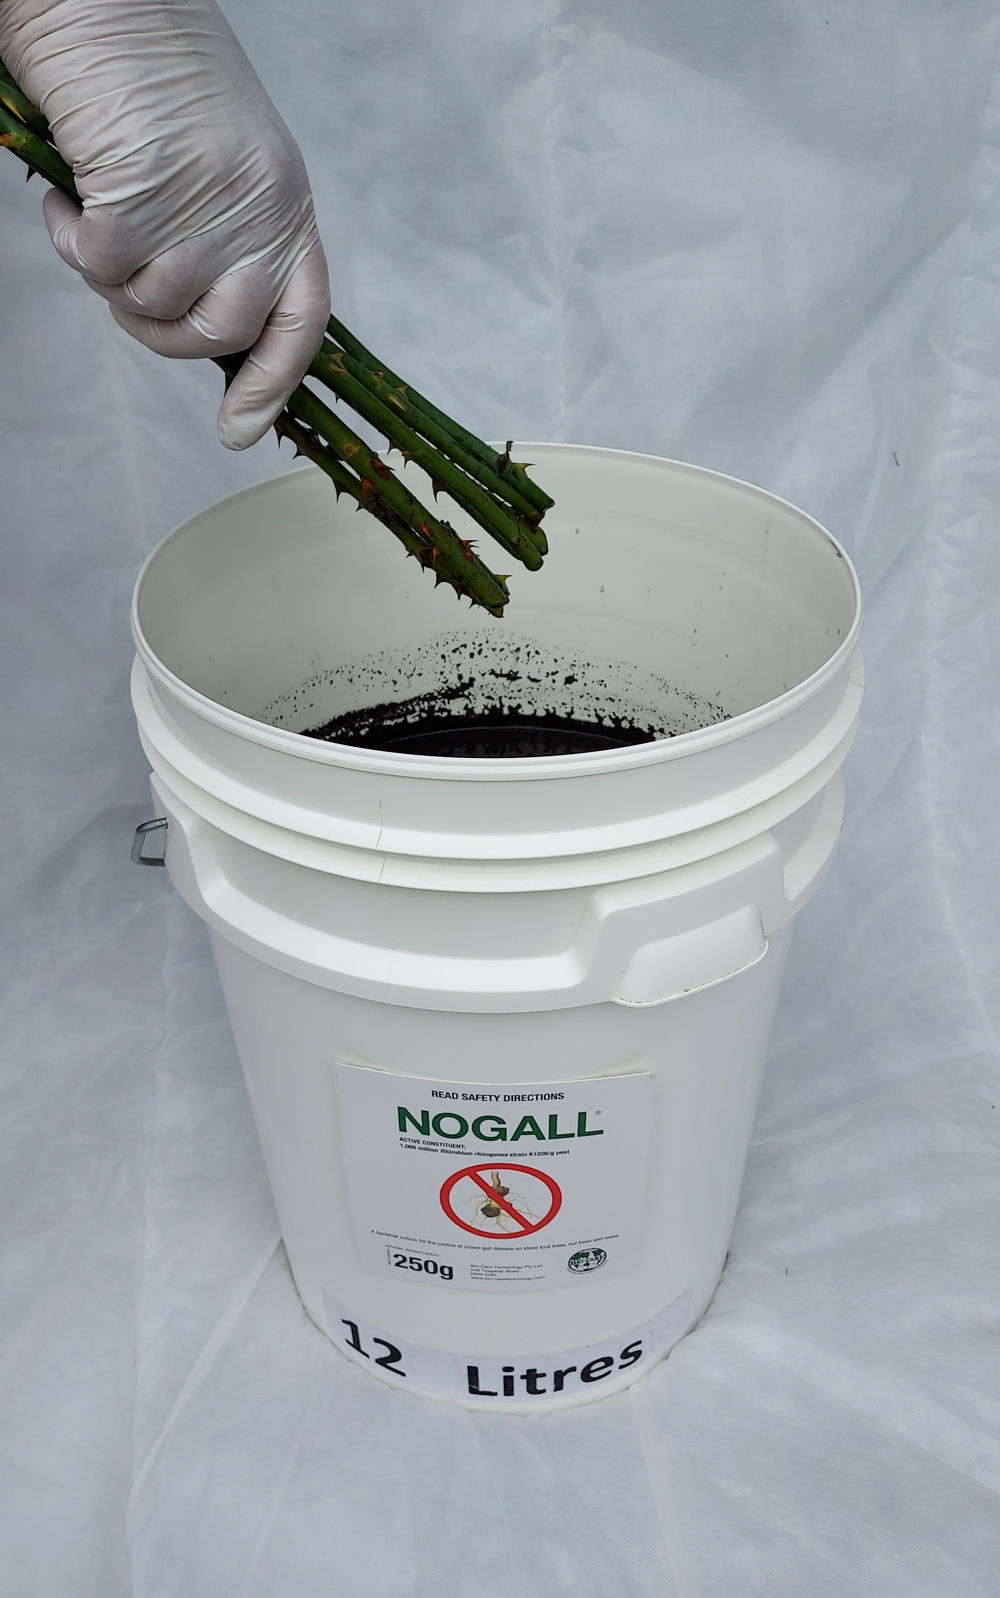 Step 6. Soak cuttings or root stock well in NOGALL and plant.